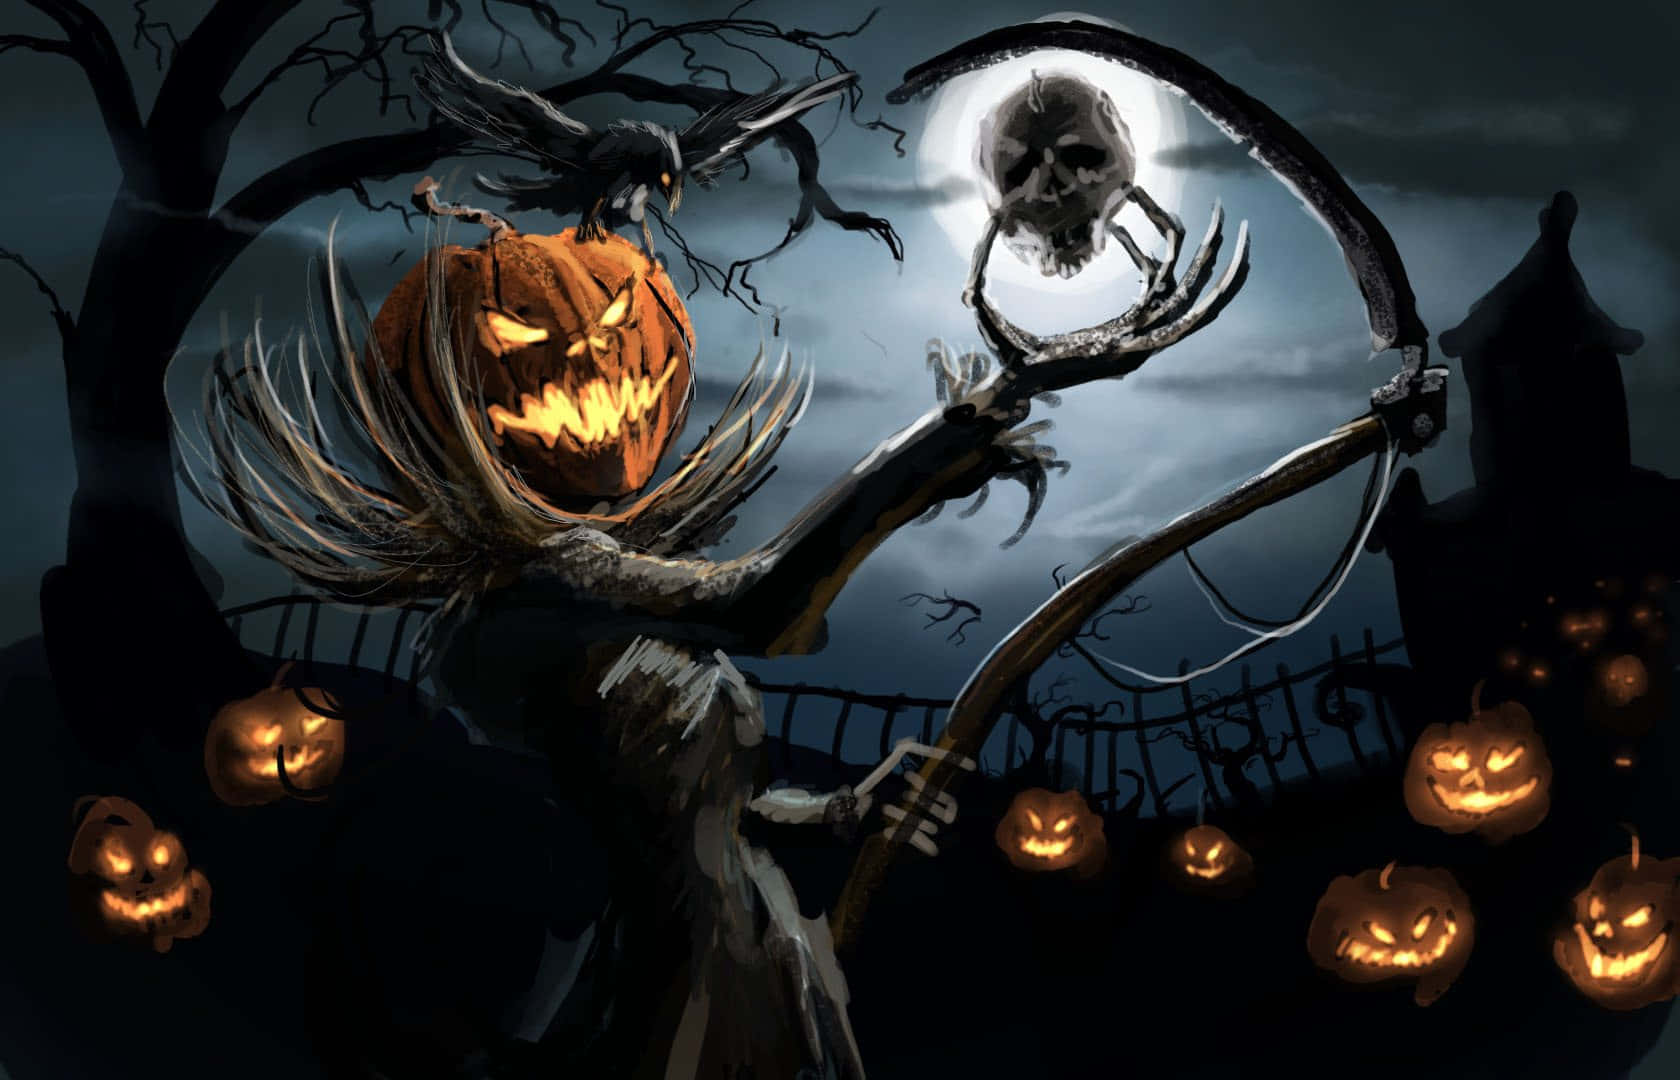 Get into the Halloween spirit with a spooky backdrop!